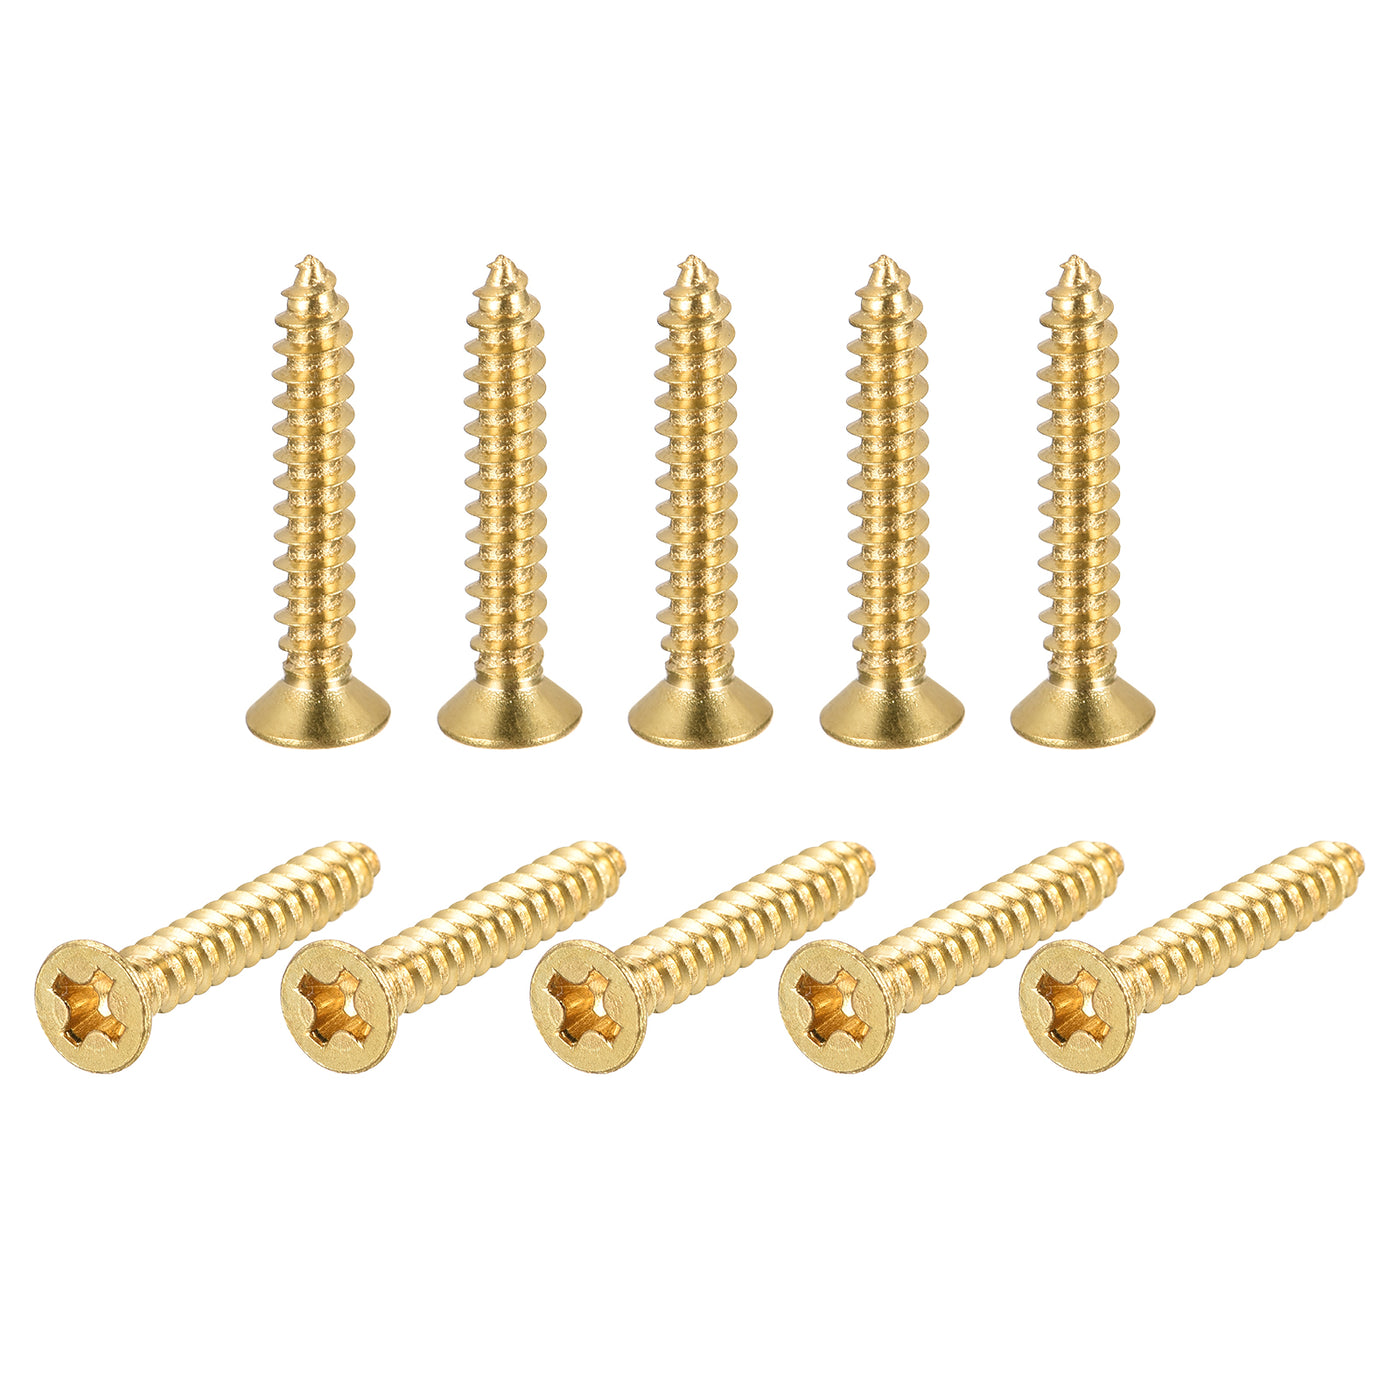 uxcell Uxcell Brass Wood Screws, M3.5x25mm Phillips Flat Head Self Tapping Connector for Door, Cabinet, Wooden Furniture 25Pcs